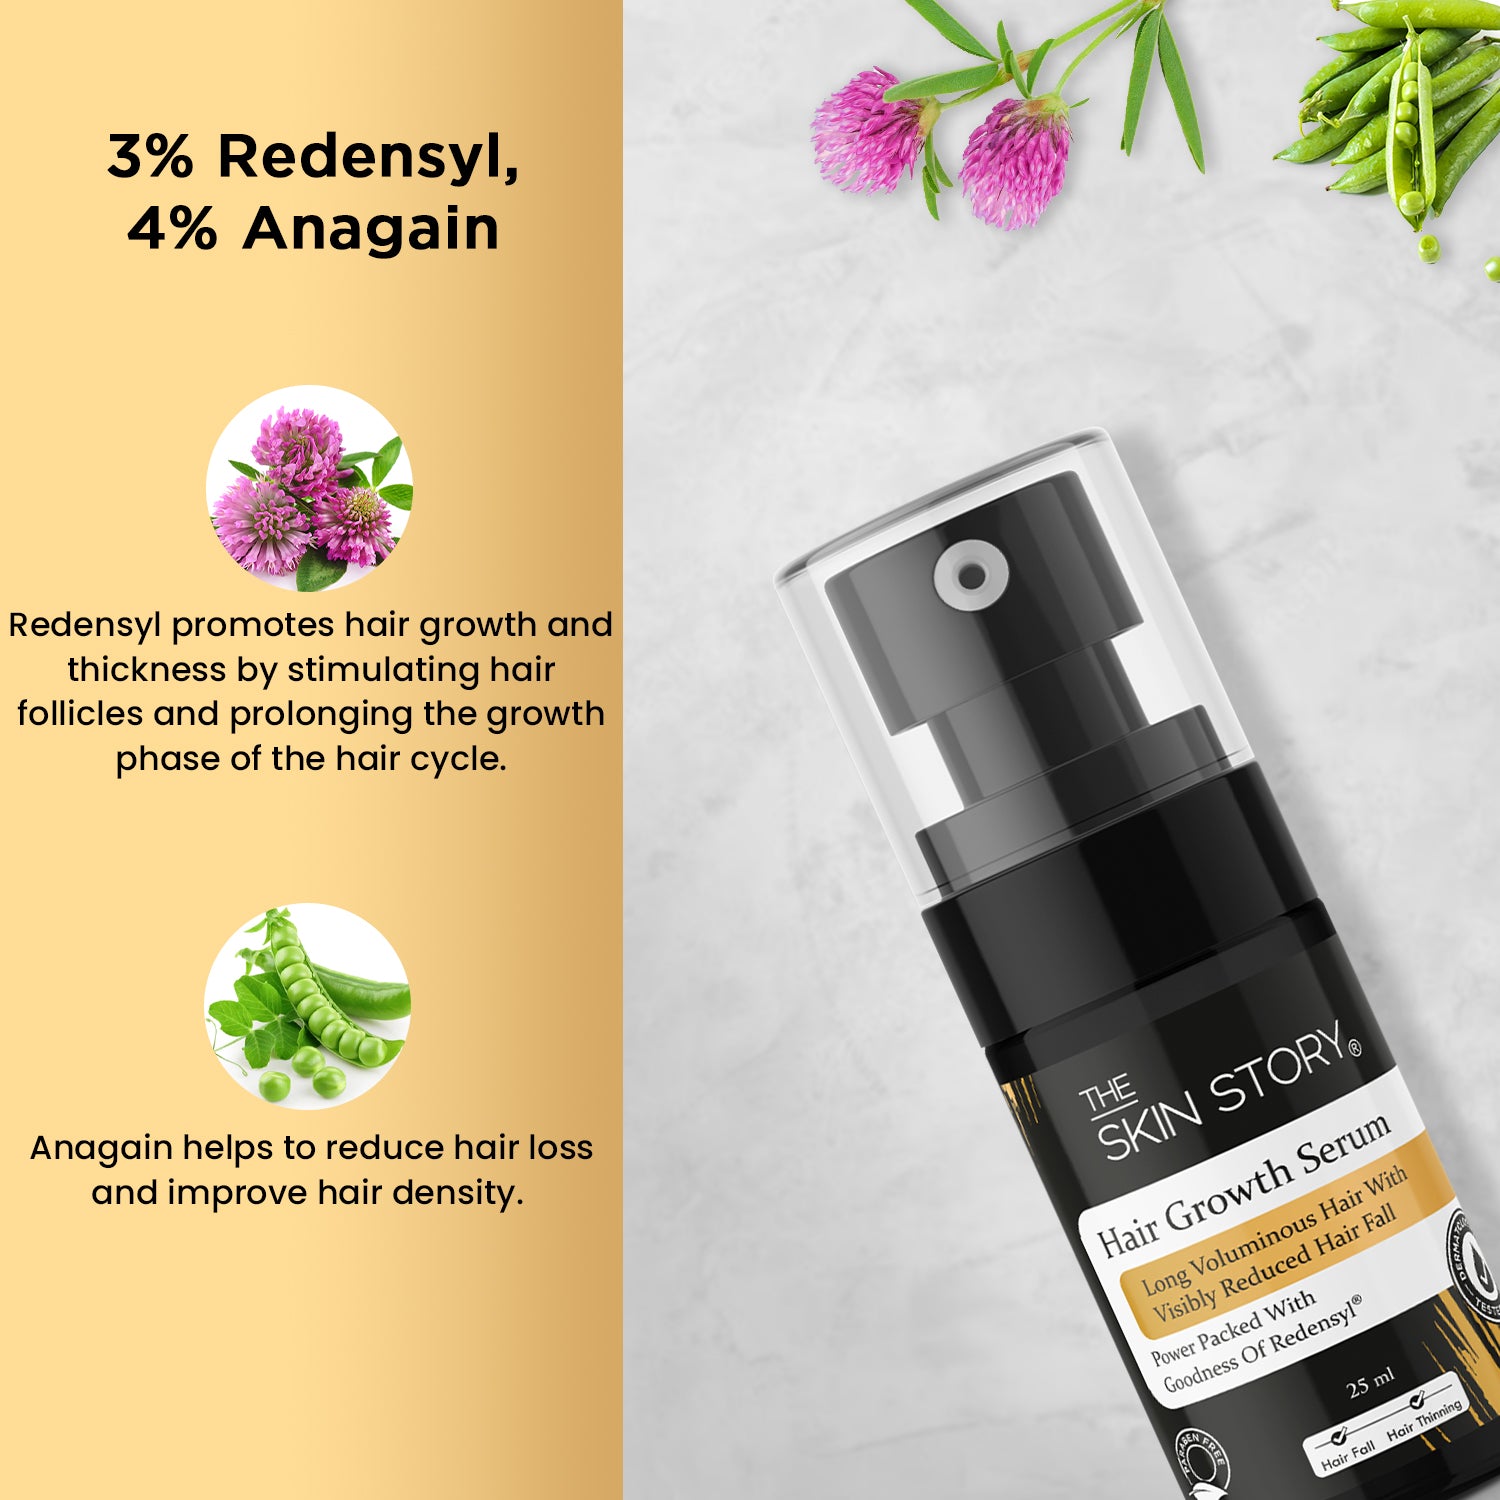 The Skin Story Hair Growth Serum | Redensyl and Anagain | Visible Results in 3 months | For Hair Fall & Hair Thinning | Damage Repair | 25ml